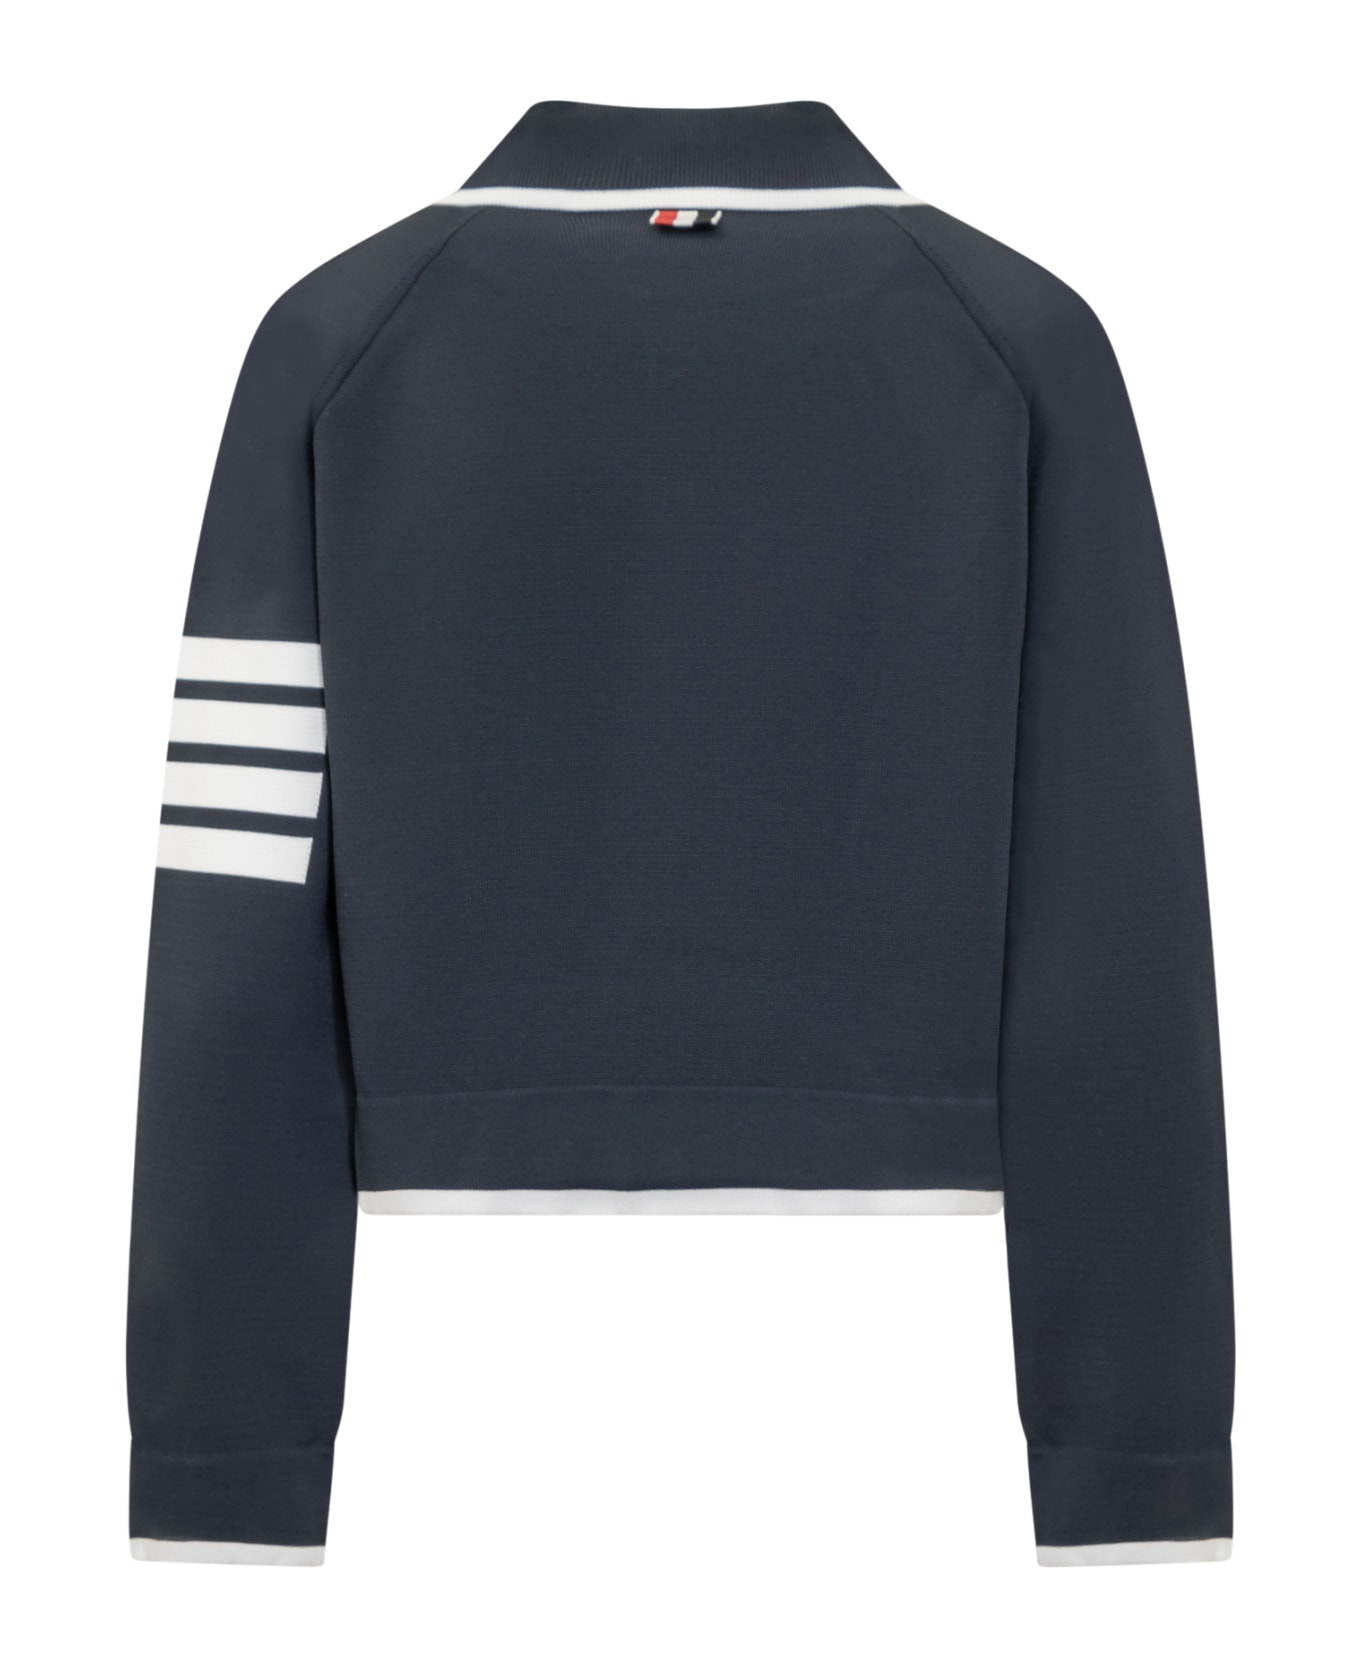 Thom Browne 4-bar Striped Button-up Jacket - NAVY